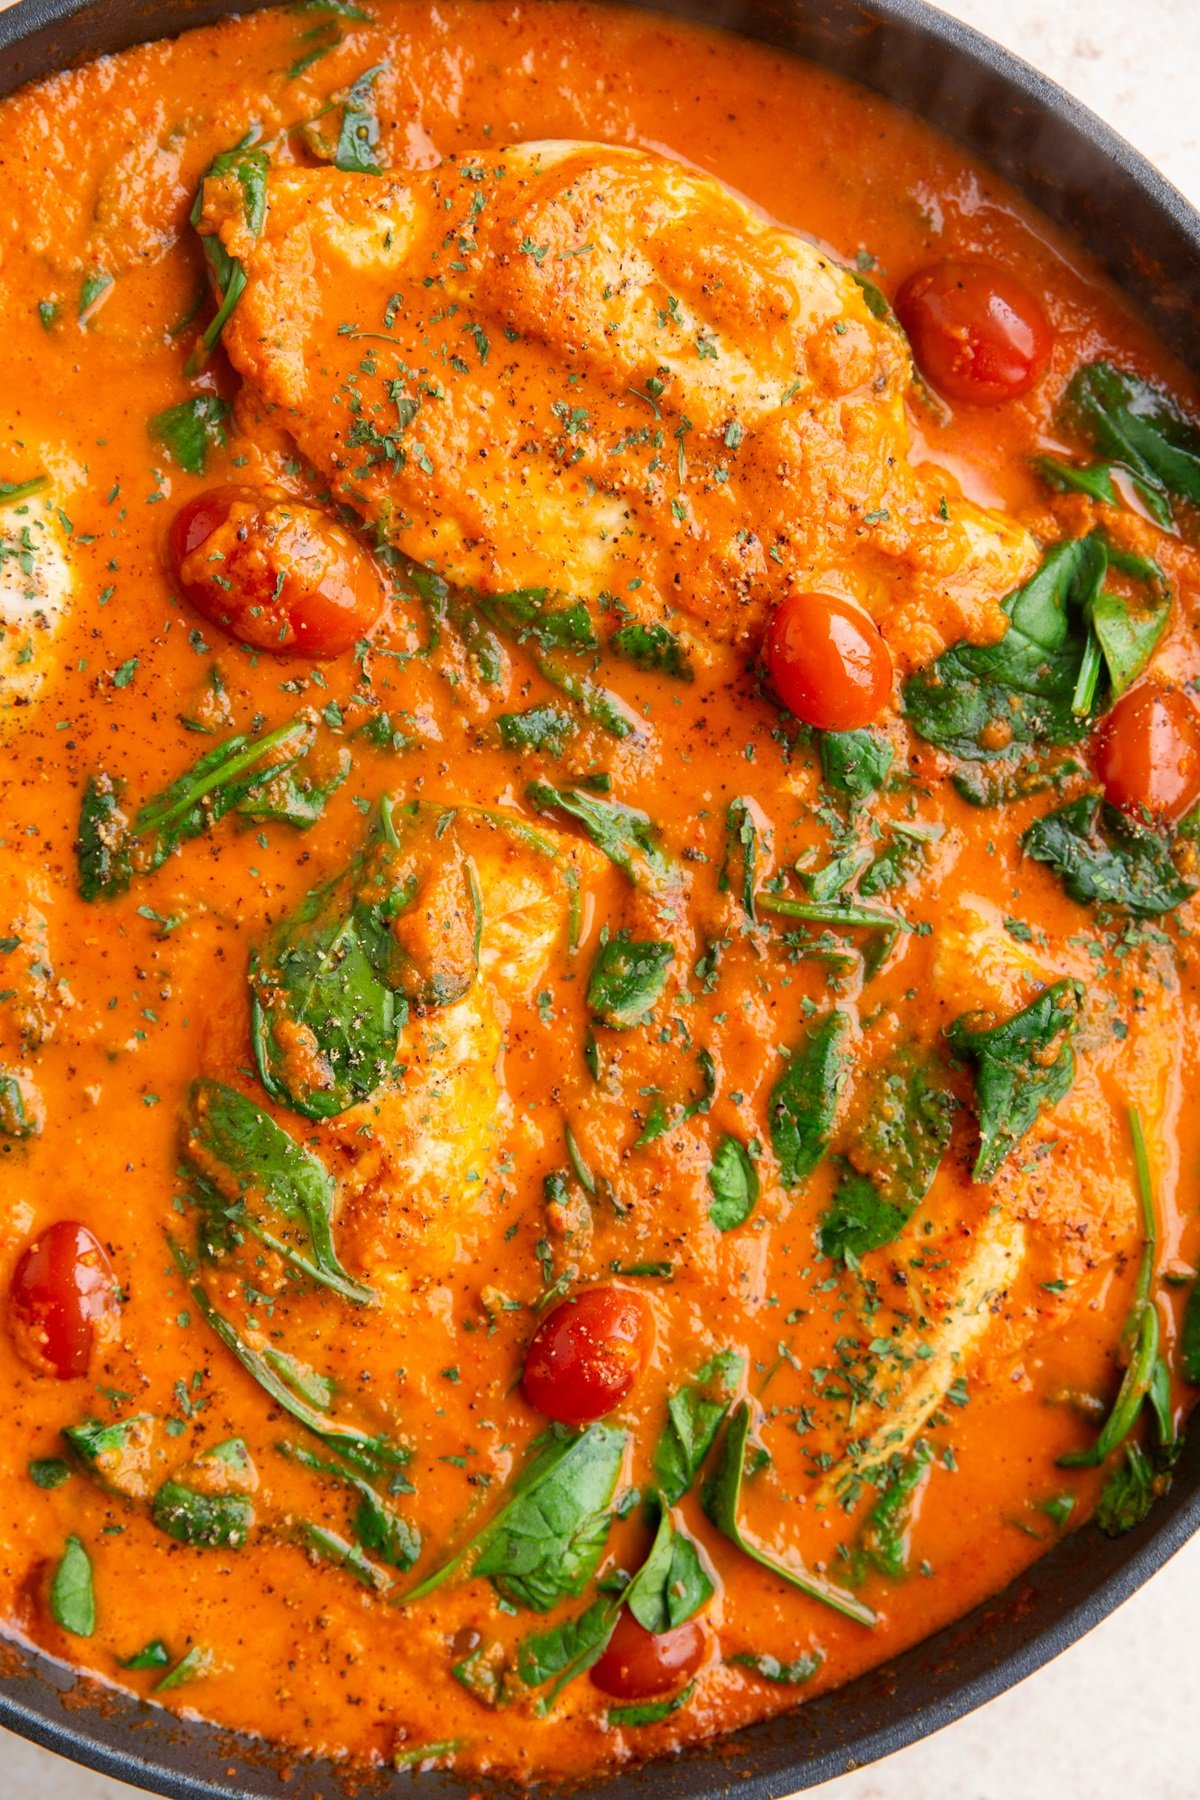 Skillet with creamy roasted red pepper chicken in creamy sauce with spinach and cherry tomatoes.